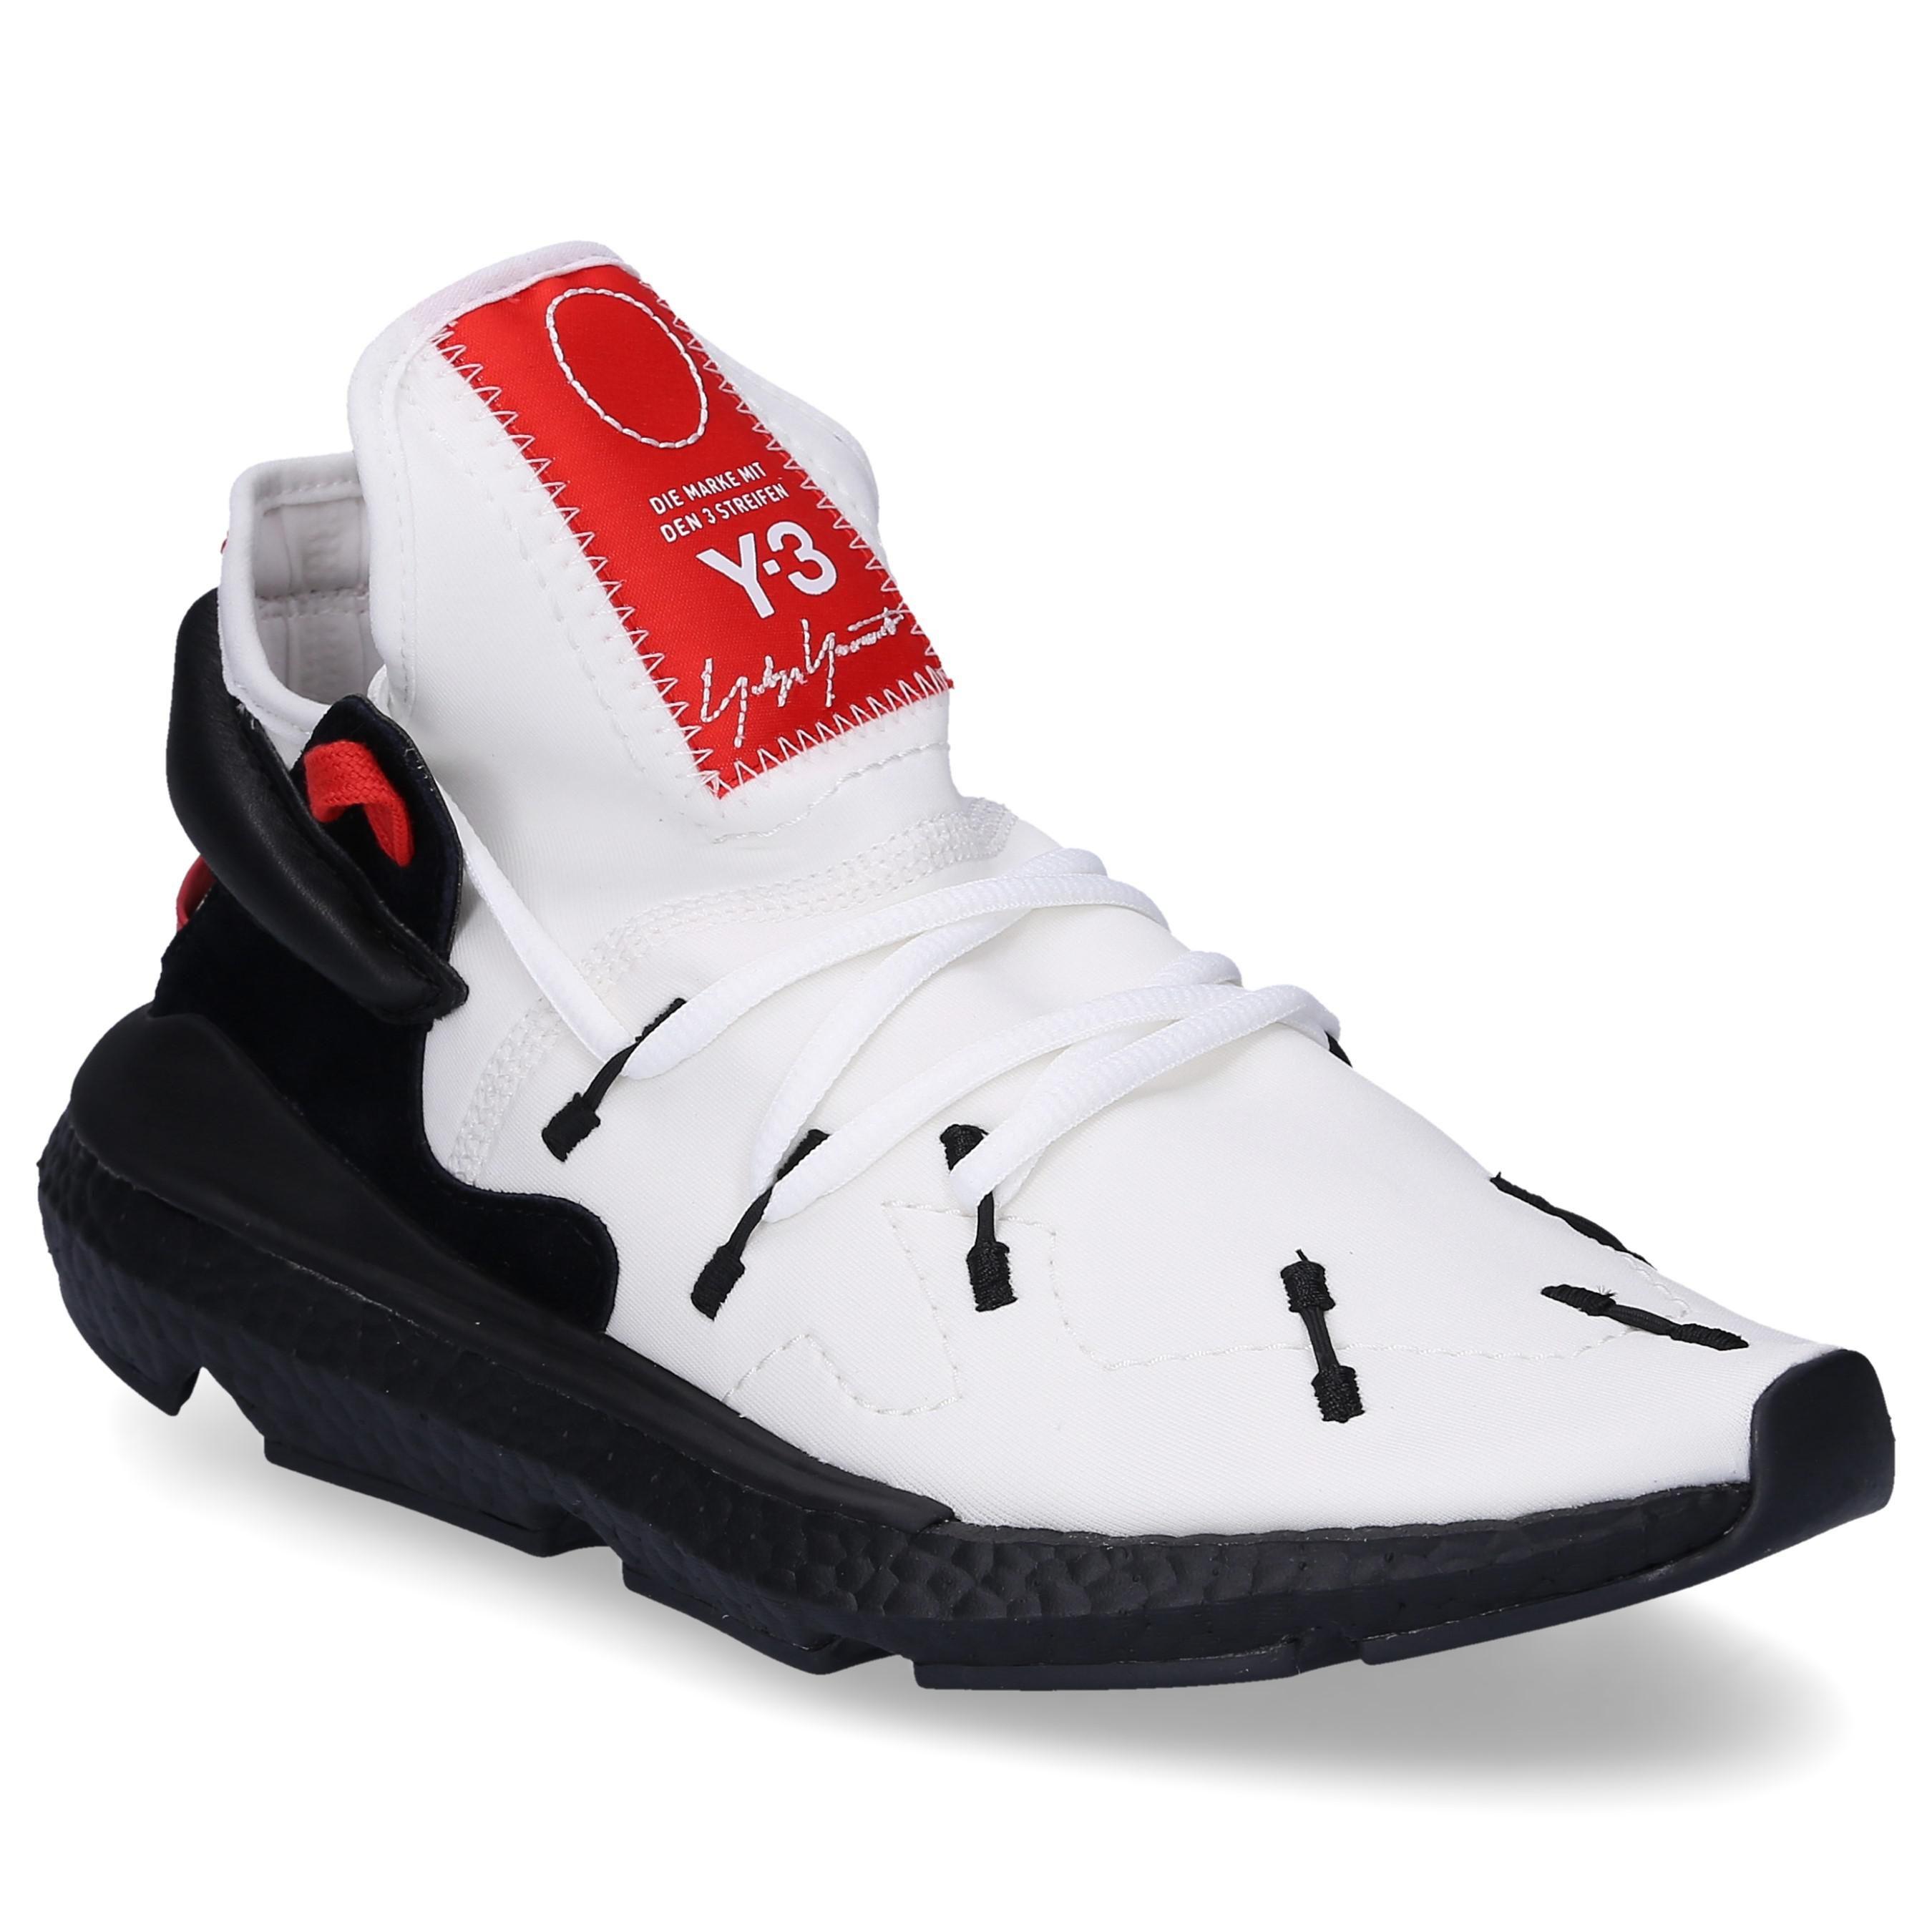 Red and White Y Logo - Y 3 Slip On Kusari Neoprene Smooth Leather Textile Logo Black Red